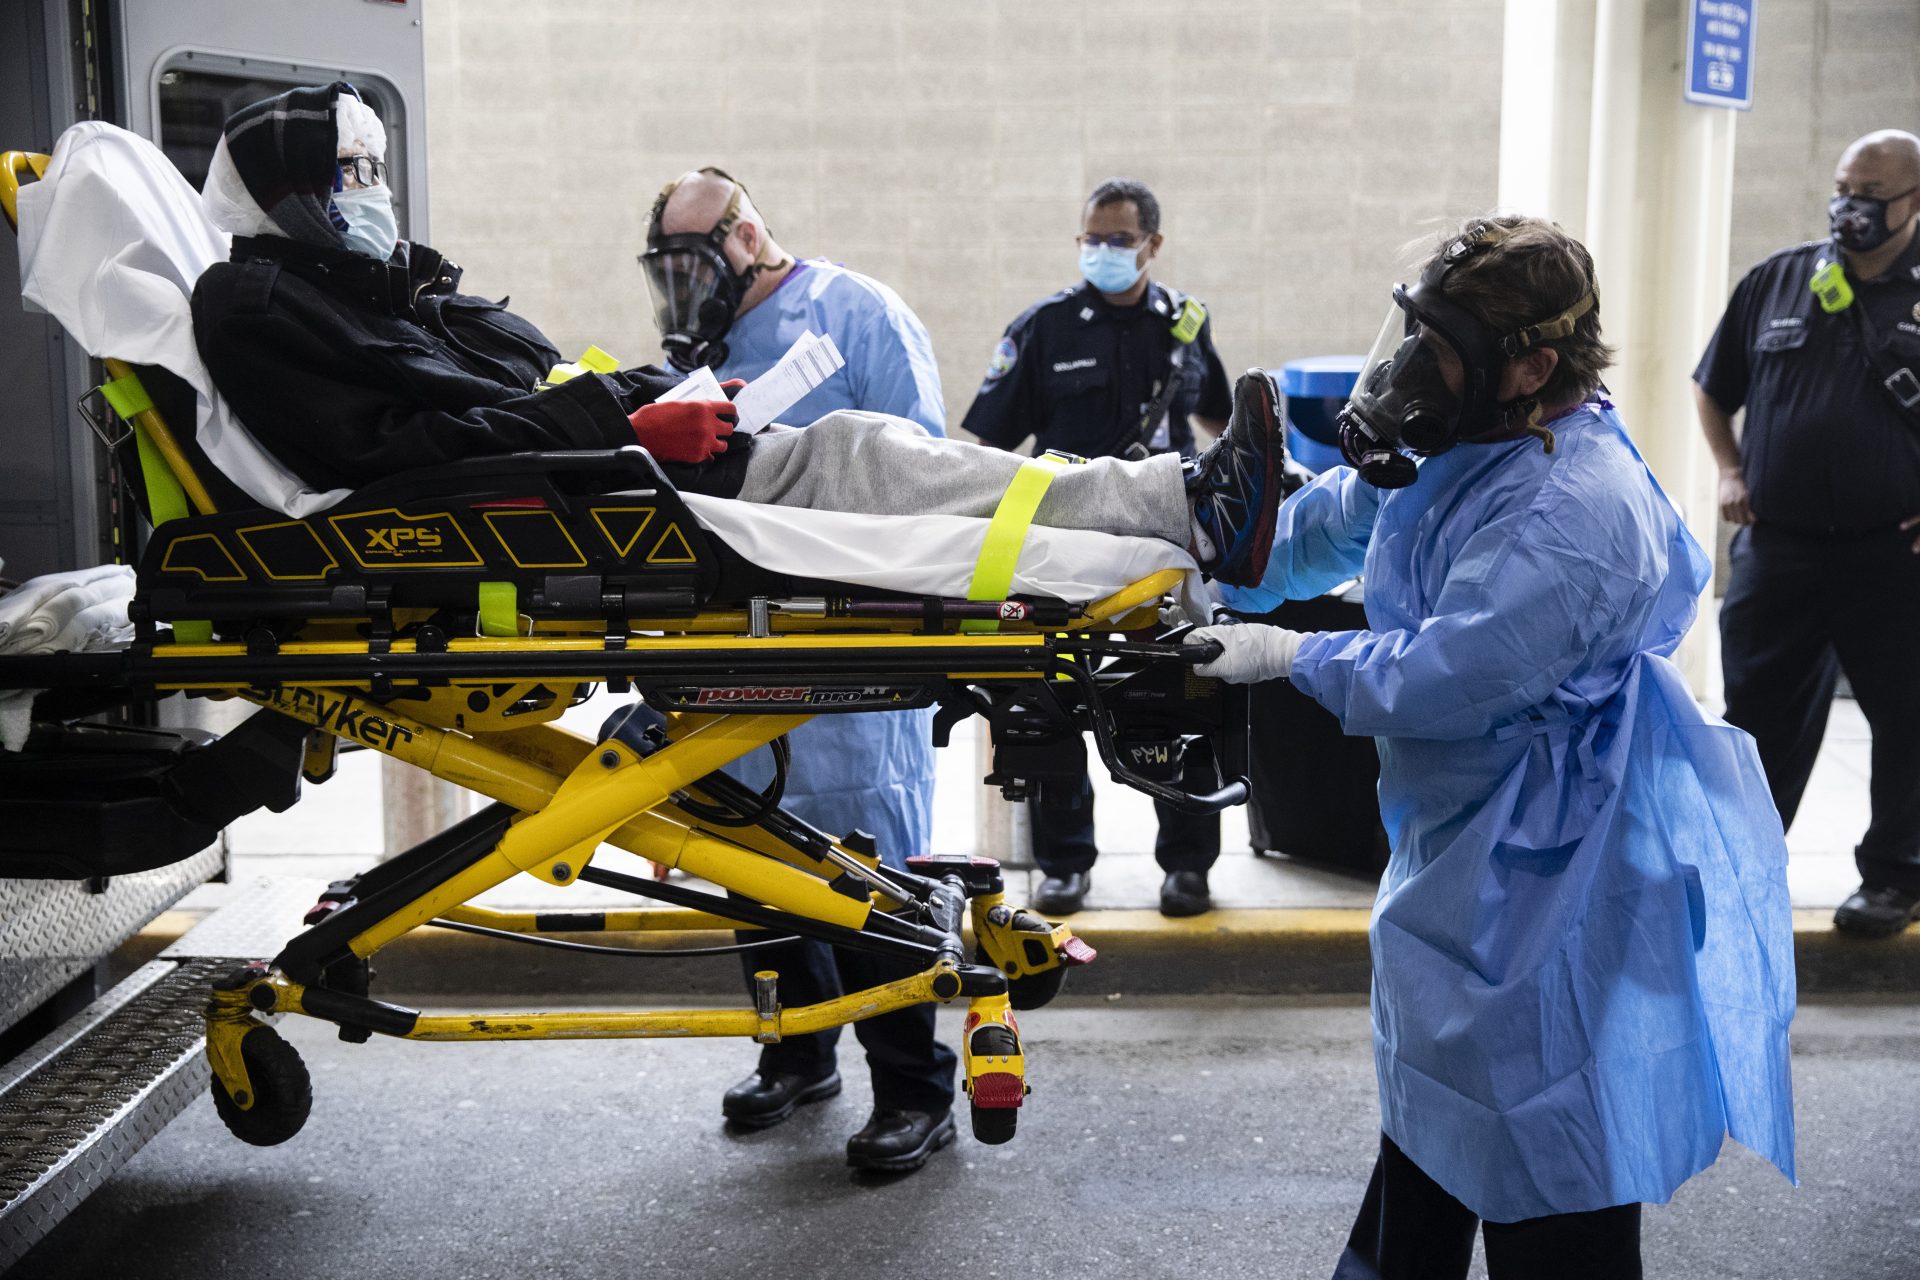 Paramedics load a person who has been staying overnight at Philadelphia International Airport into an ambulance in Philadelphia, Tuesday, May 26, 2020. Officials on Tuesday began removing dozens of people who have been sleeping at the city's airport during the coronavirus pandemic.